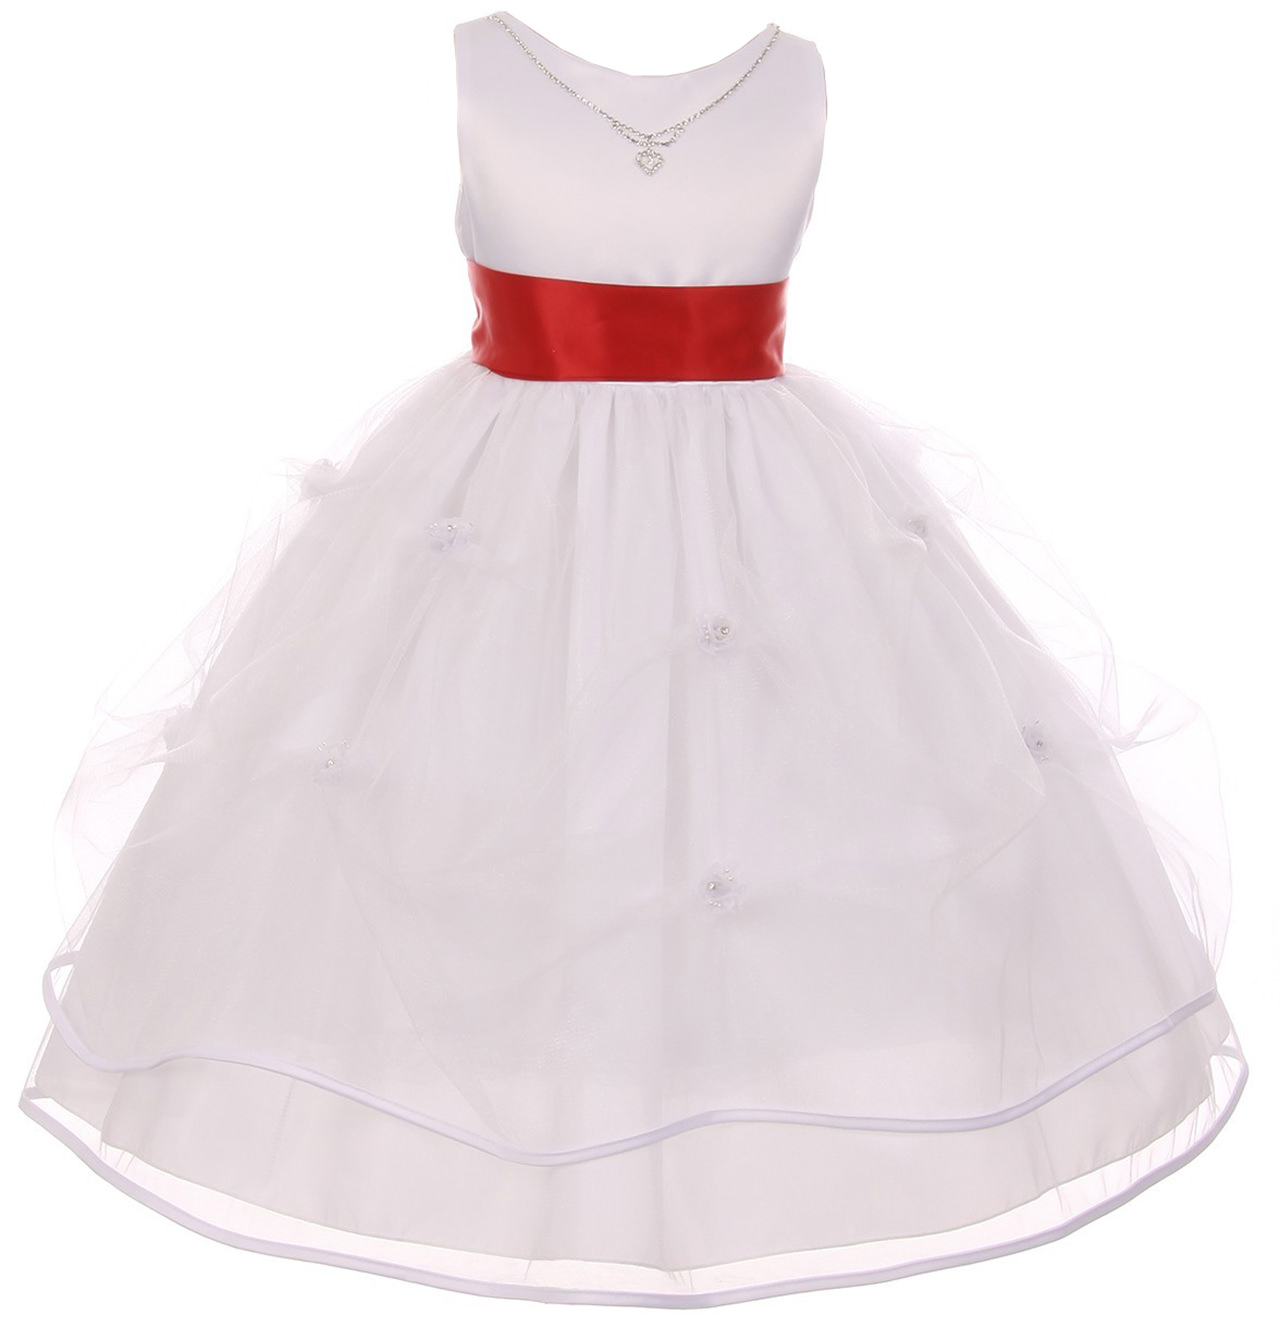 Little Girls Sleeveless Crystal Necklace Tulle Pageant Communion Flower Girl Dress Red 6 (C01B16W) - image 1 of 3